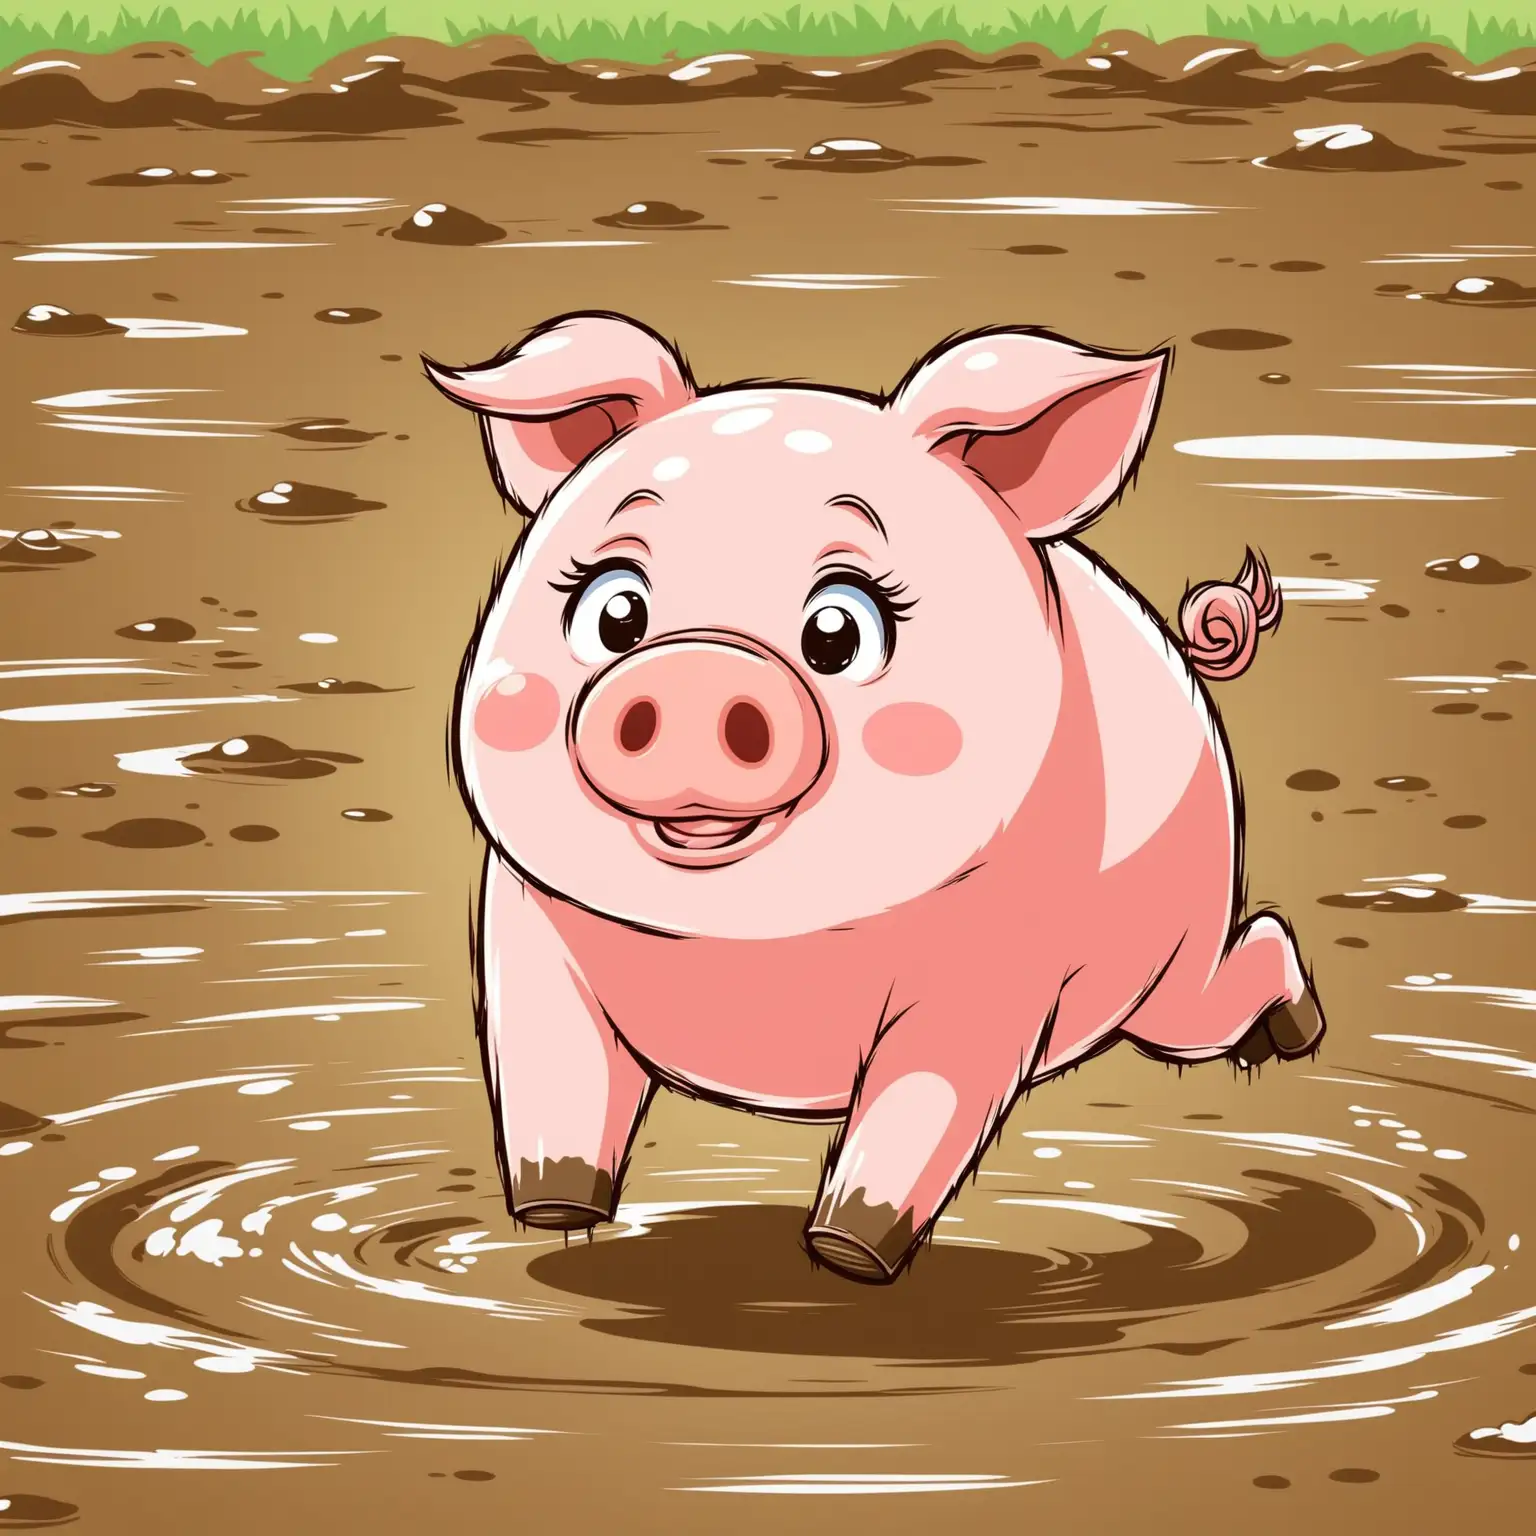 Playful Cartoon Pig Hopping in Mud Puddle